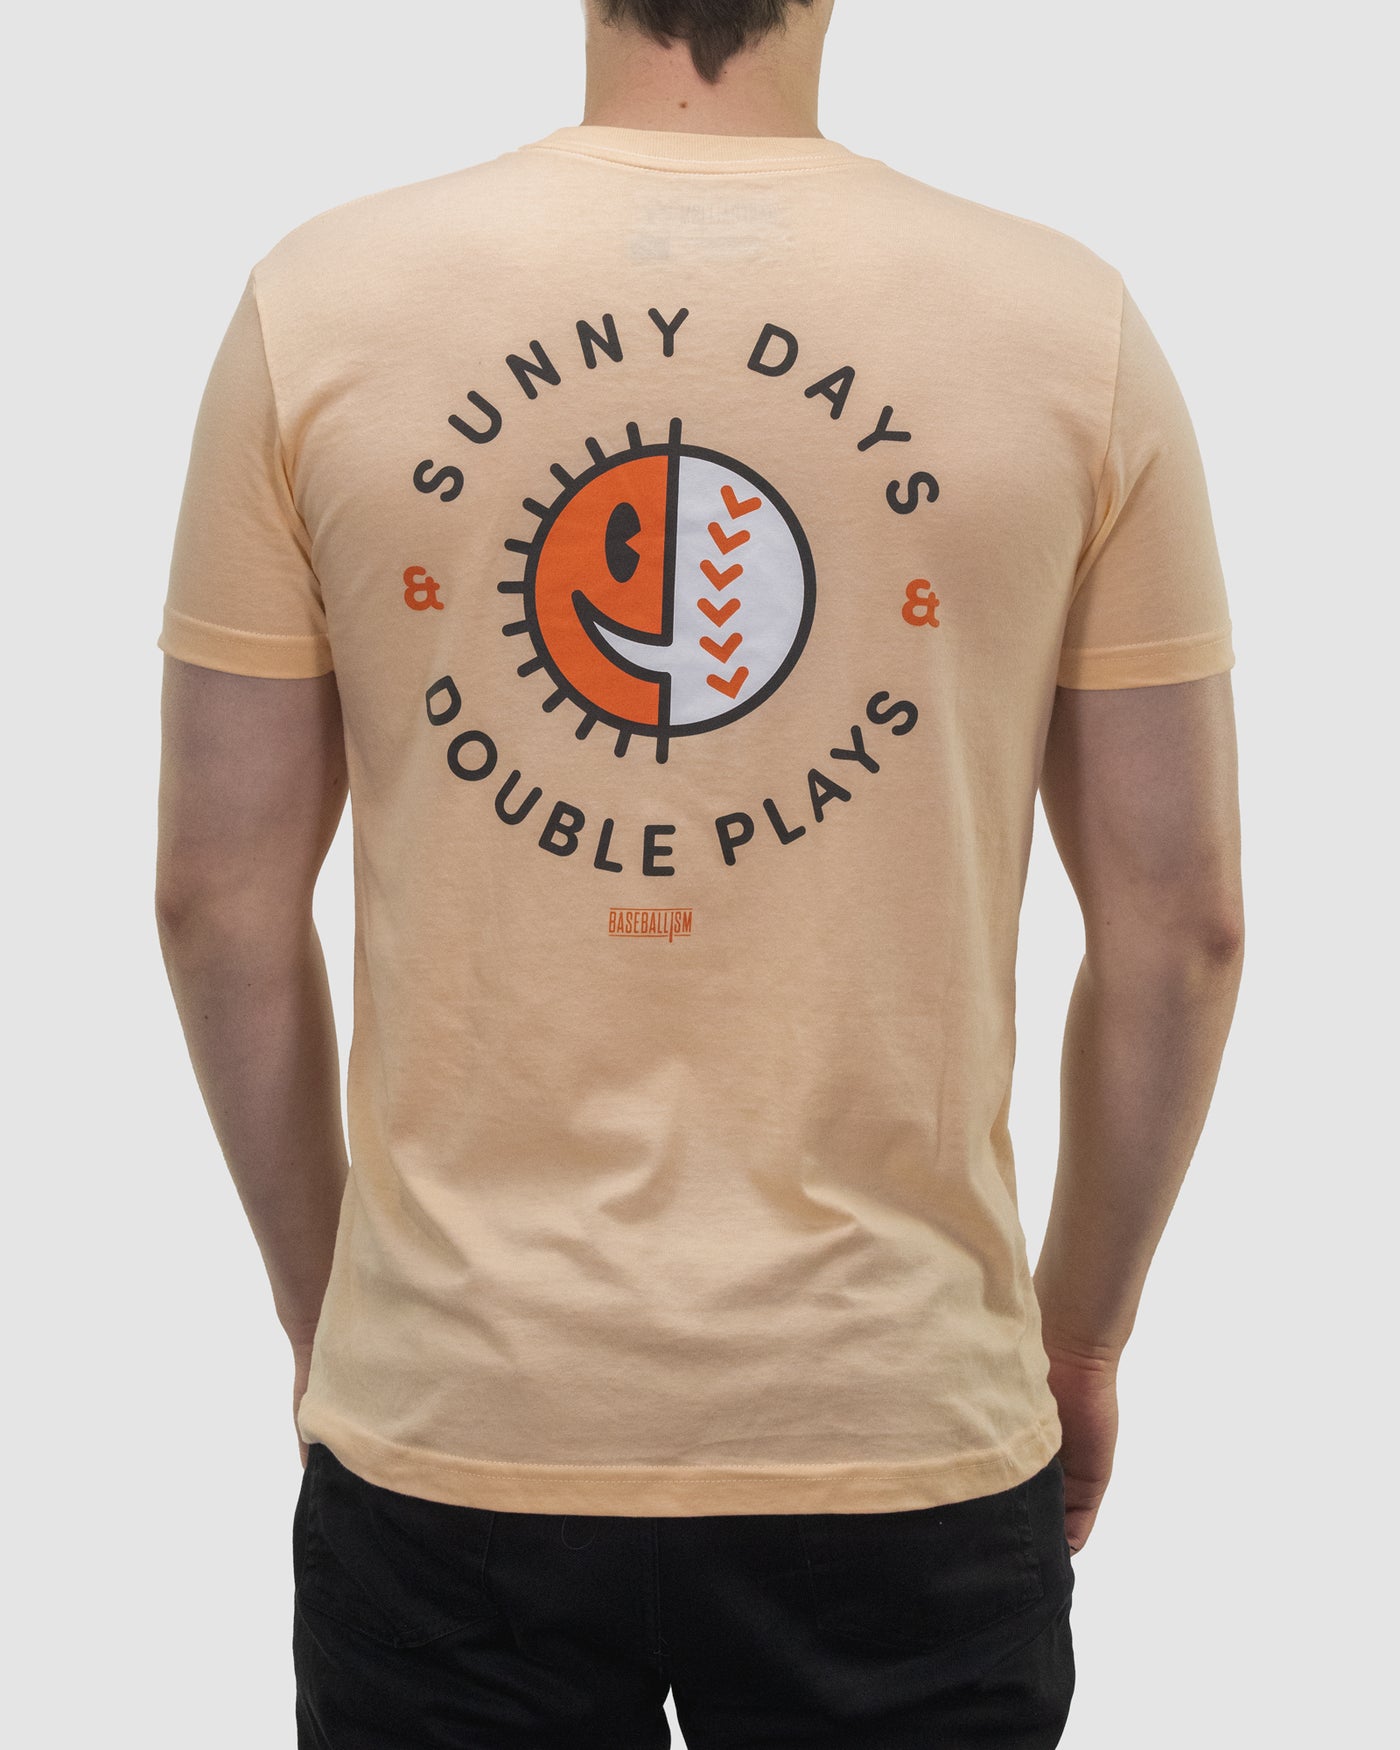 Sunny Days and Double Plays - Men's